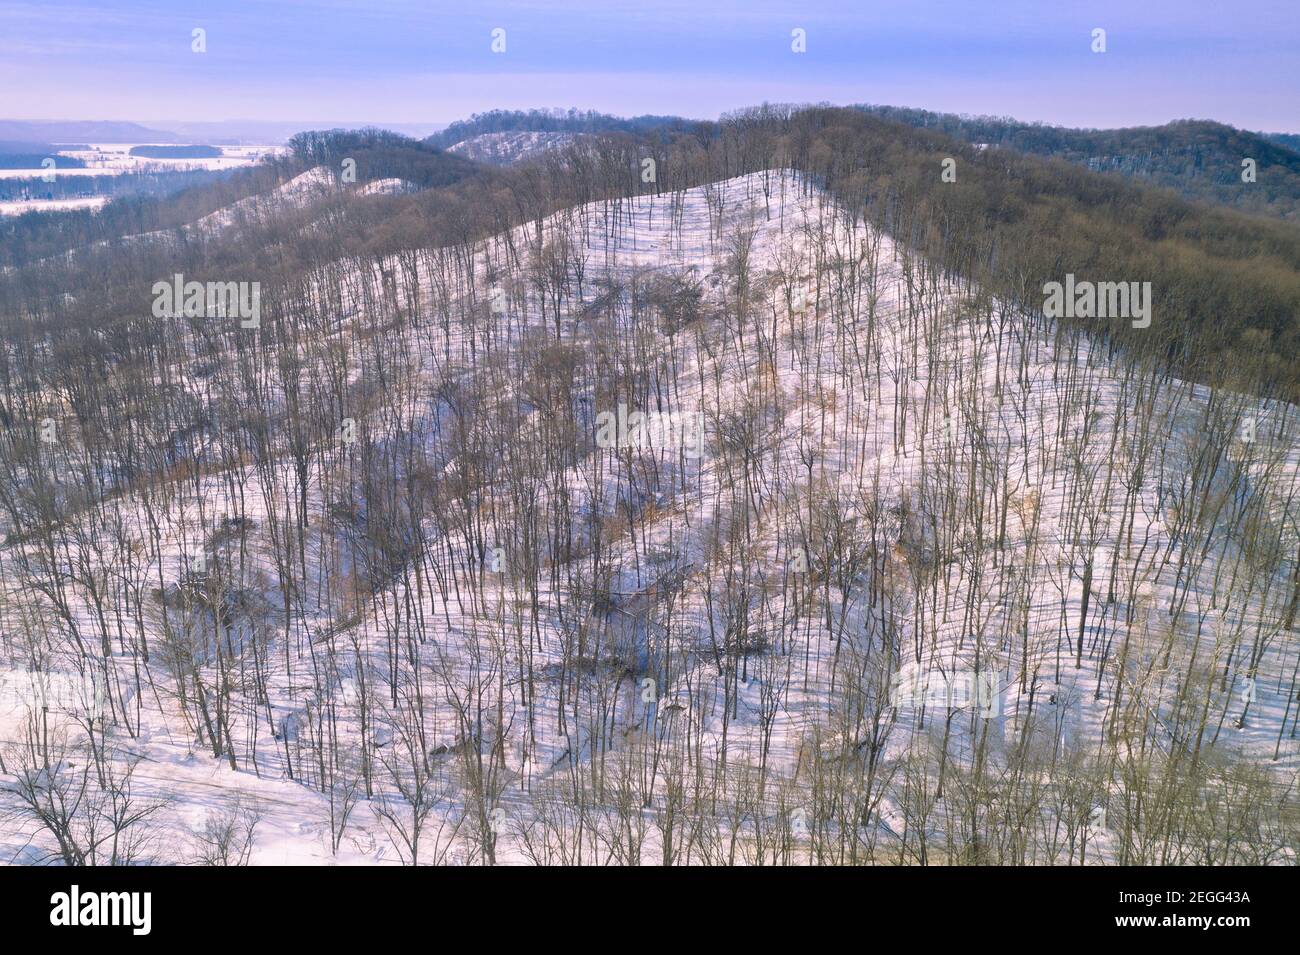 The hills of skyline drive in central Jackson County, IN as seen from a bird's eye view after a significant snow fall. Stock Photo